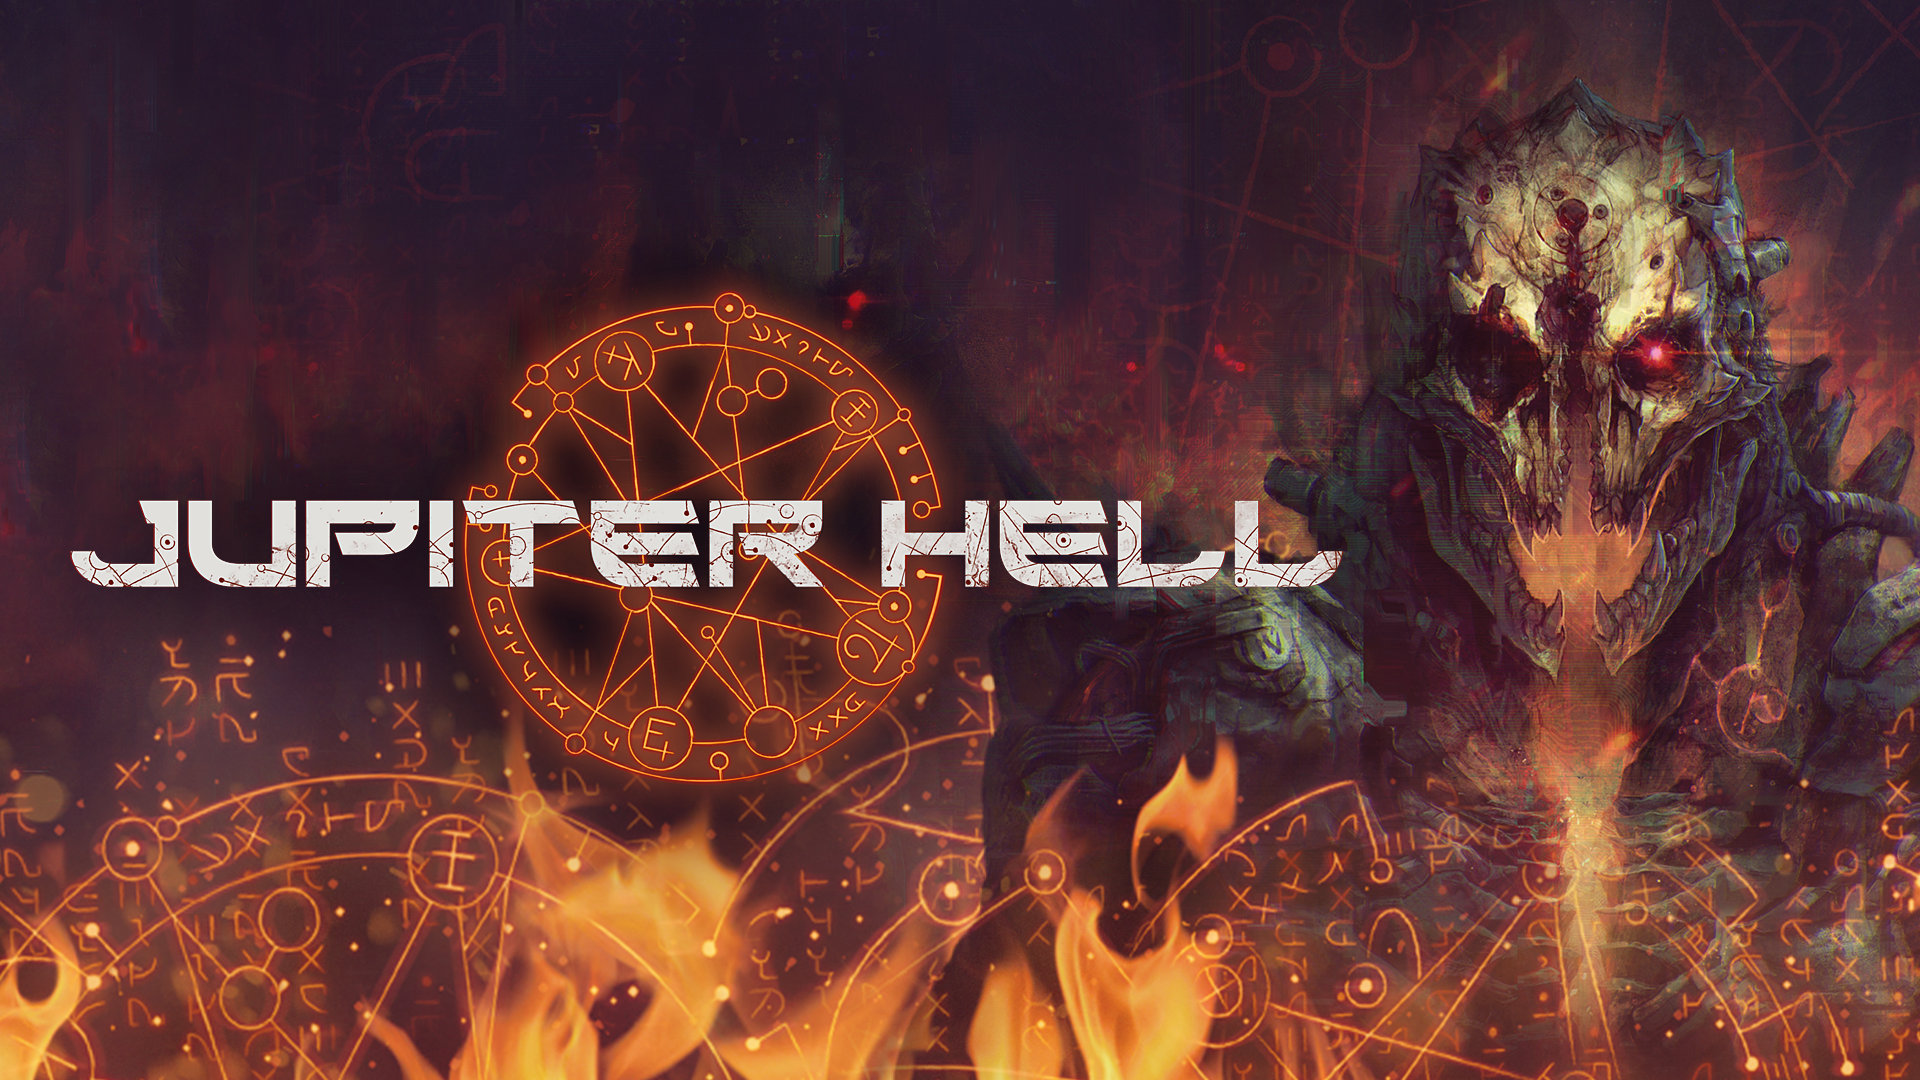 Hell on steam фото 75